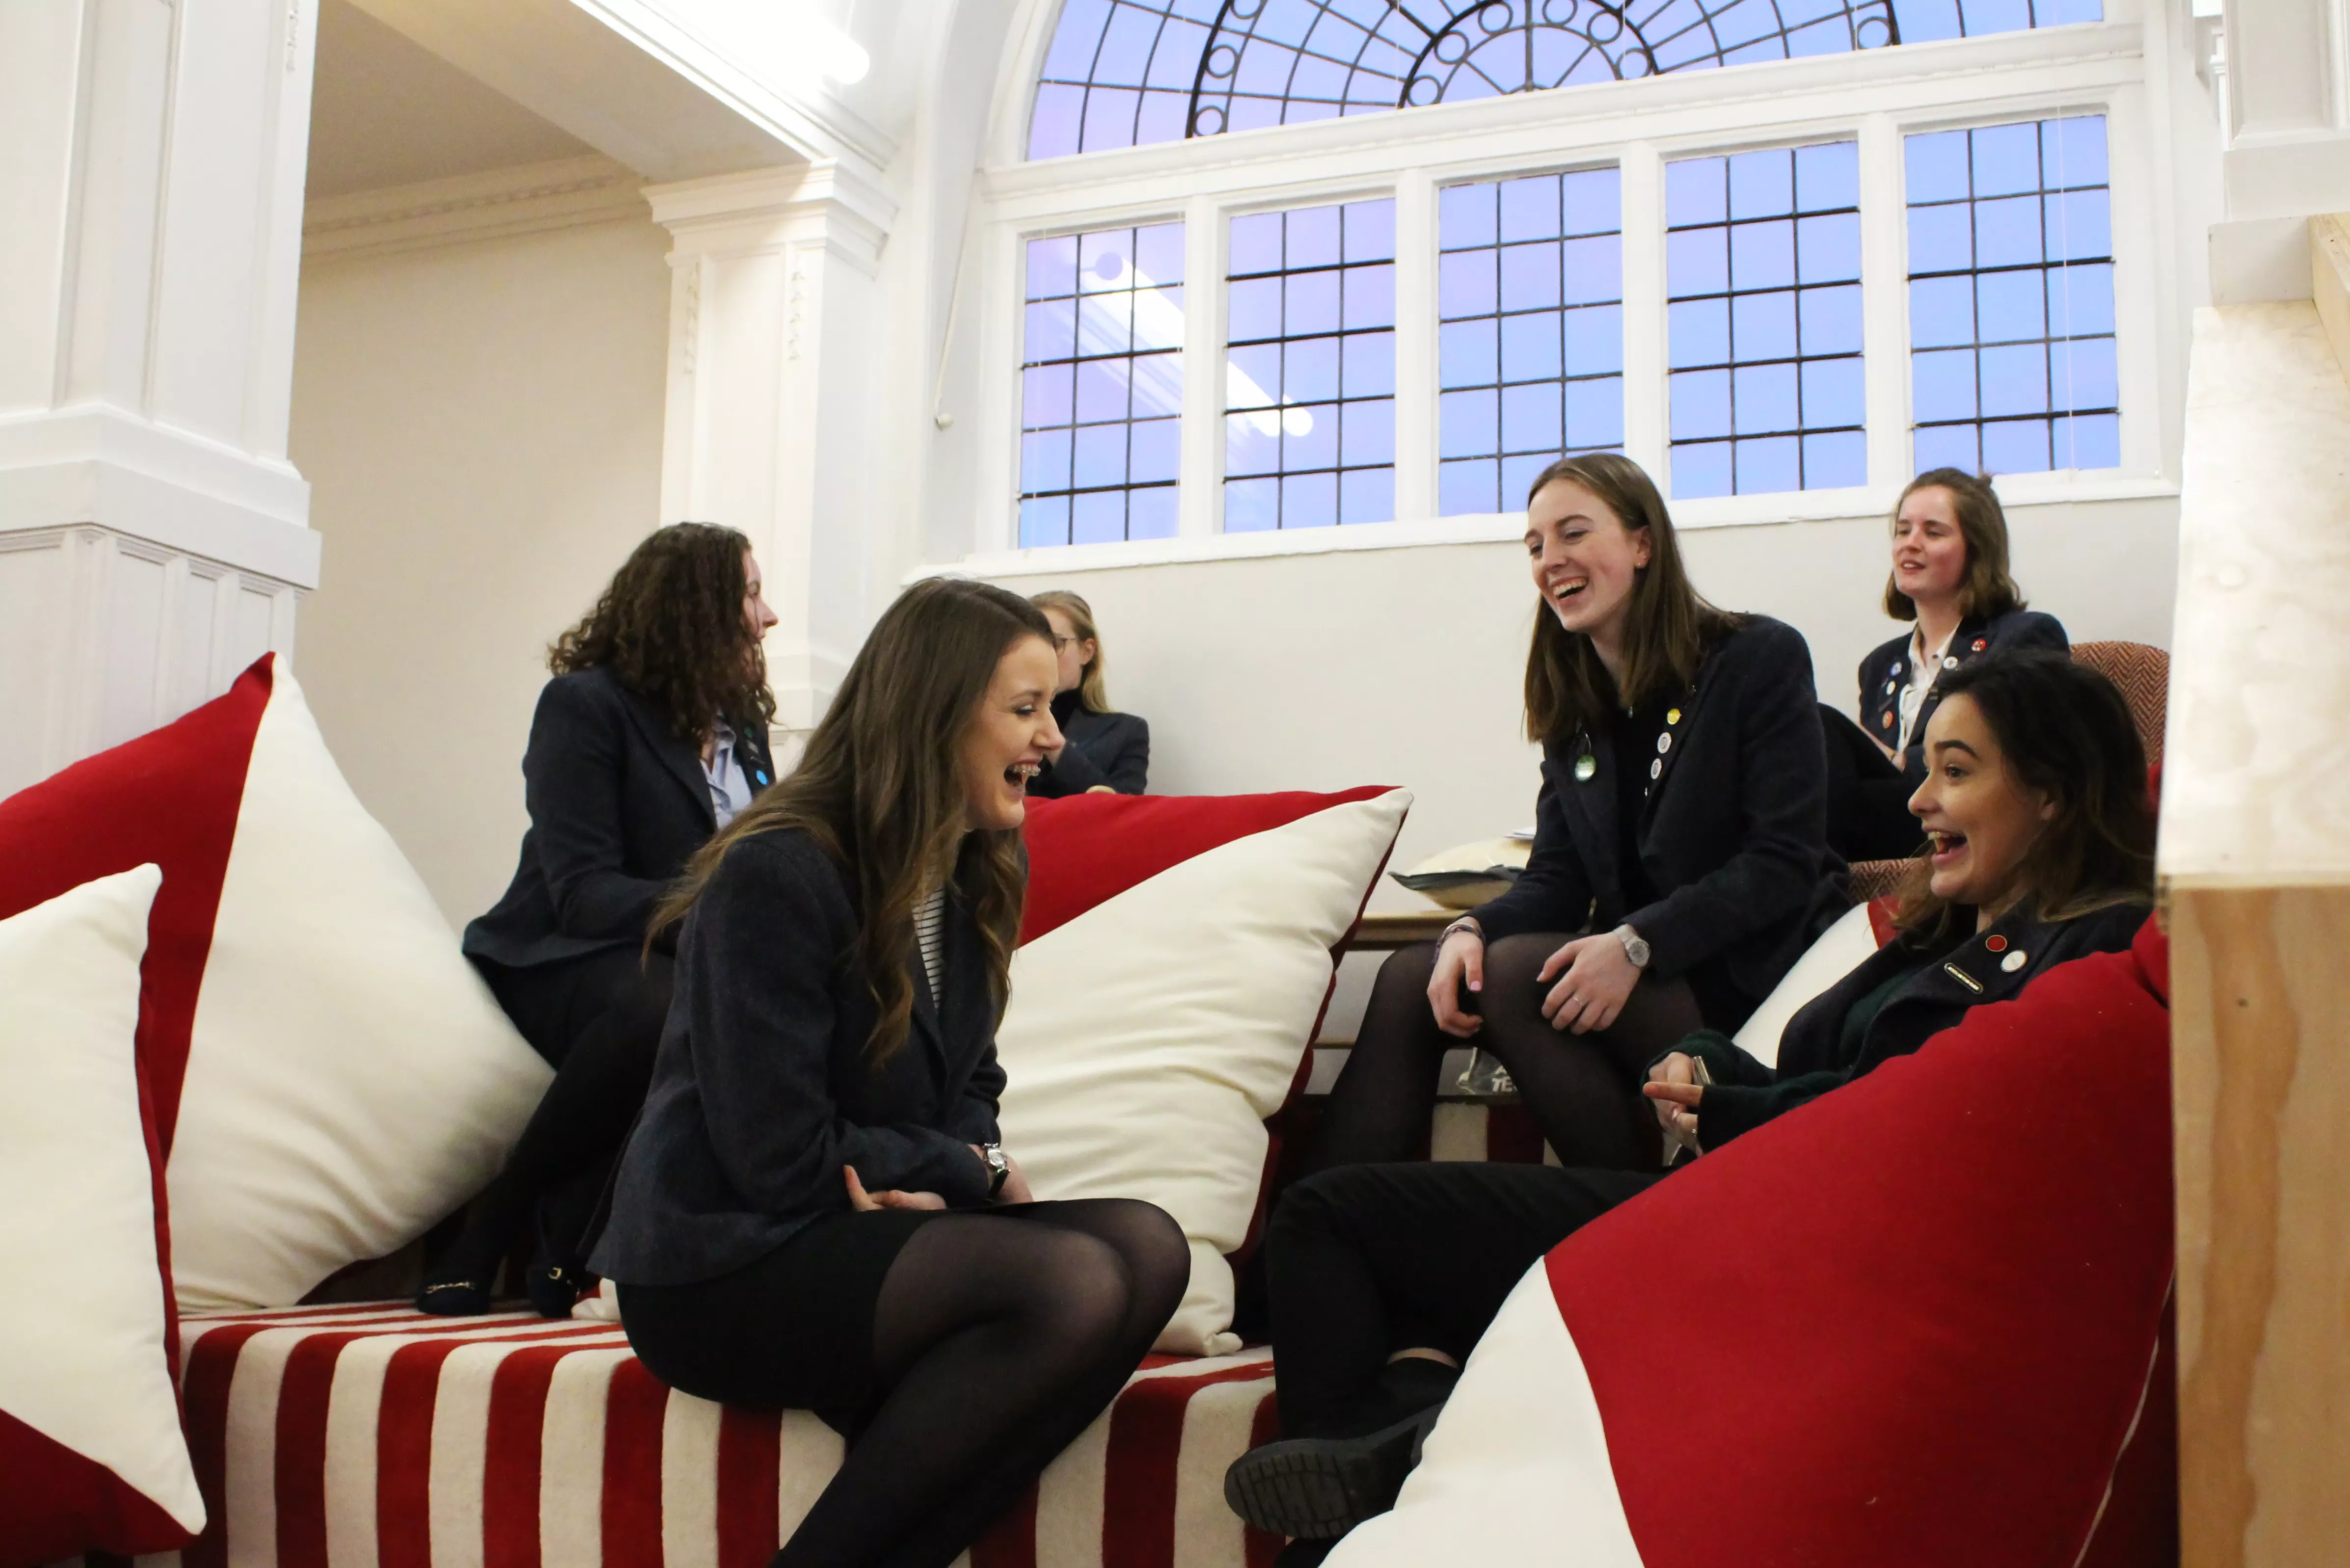 Girls at Roedean School appreciating their new, improved Sixth Form Centre, Keswick Hall | Dickinson British Boarding School Consulting